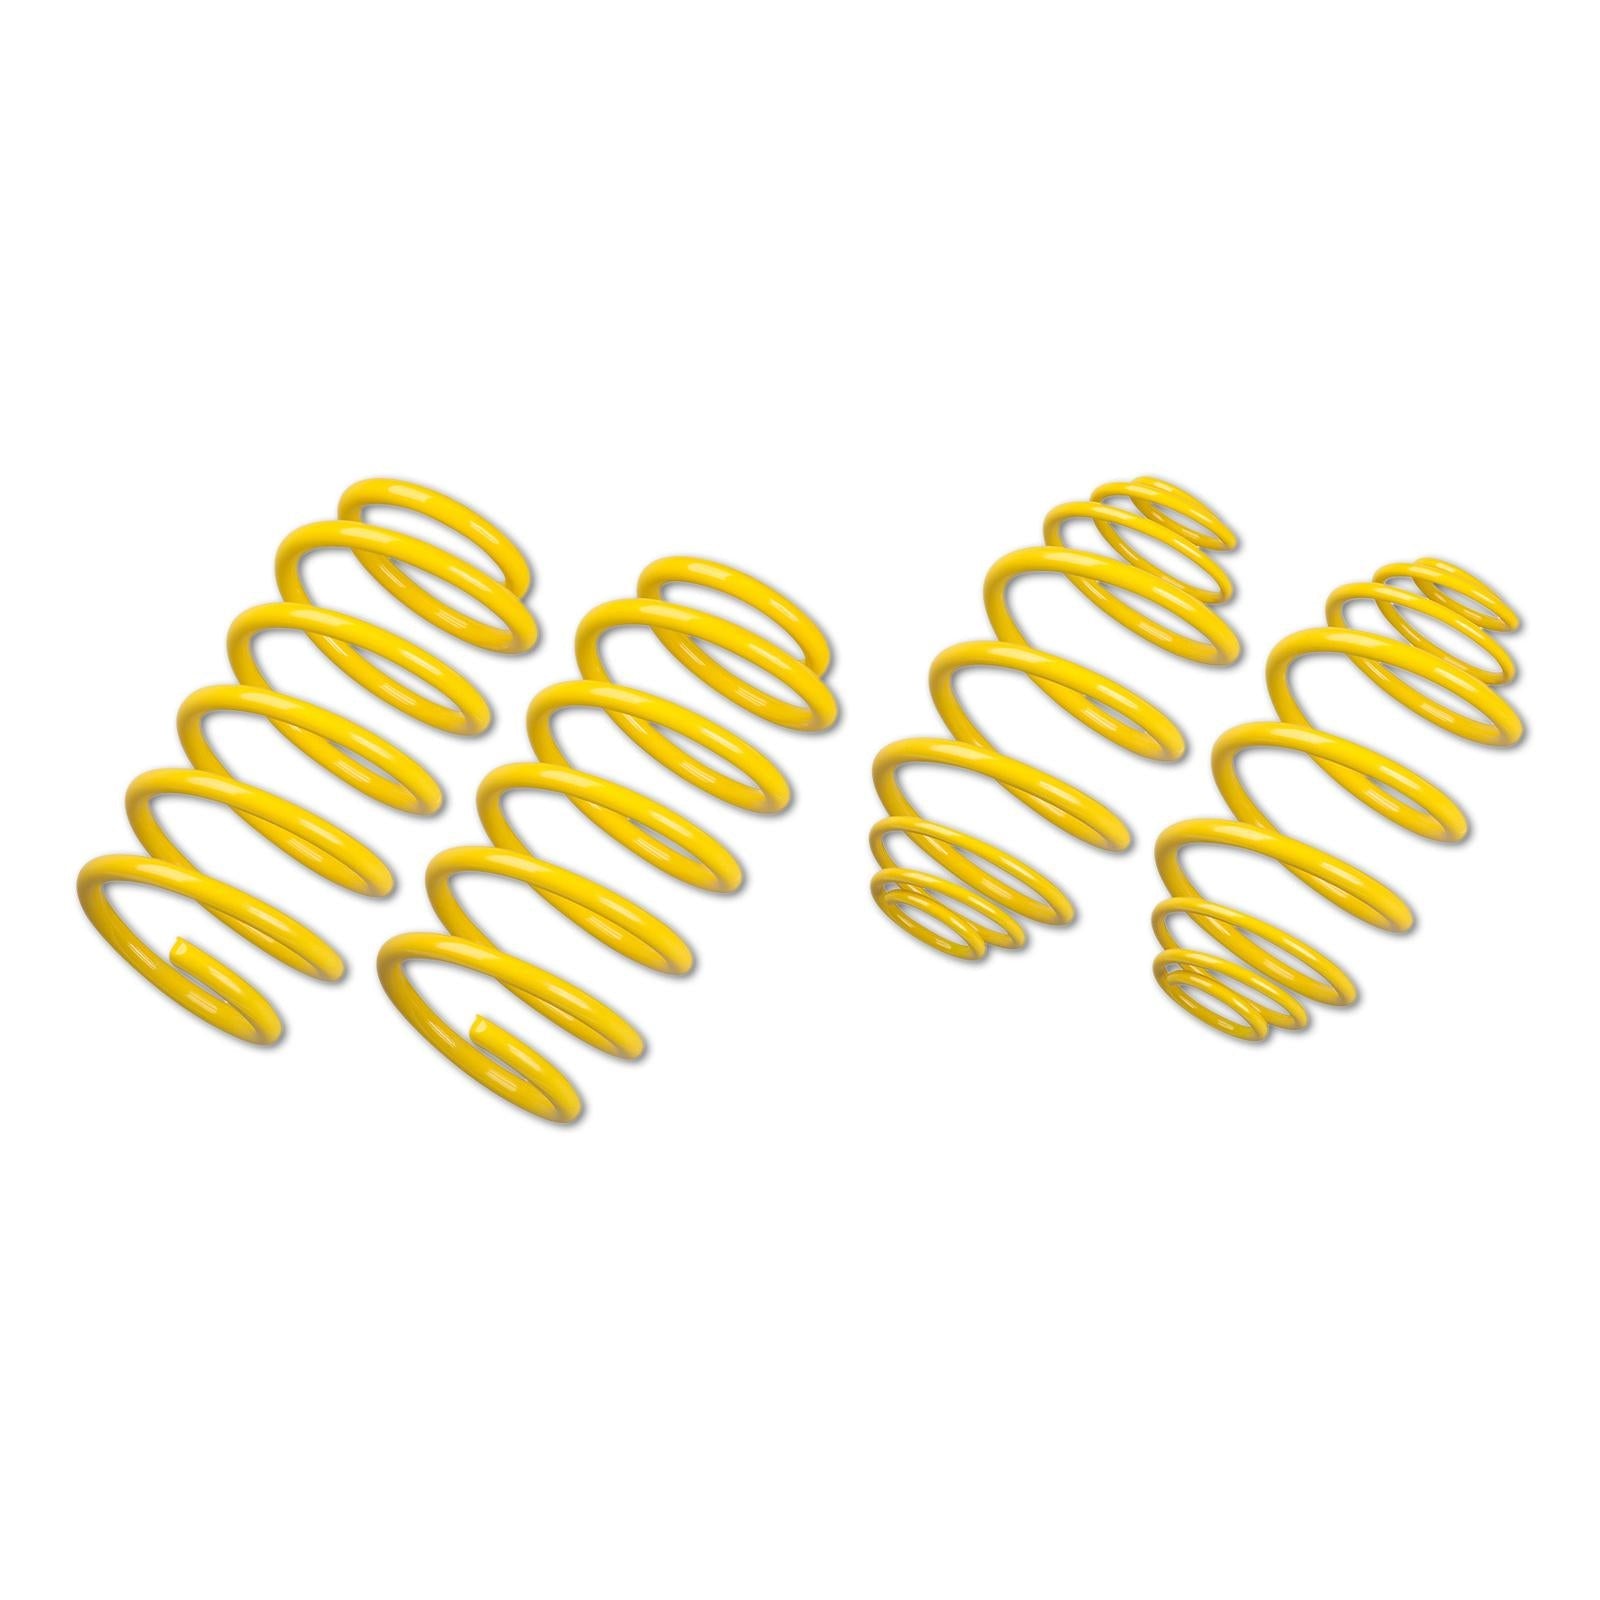 ST Suspensions Lowering Springs - BMW E30 Sedan/Coupe, Front Strut 45mm (318i/318is)